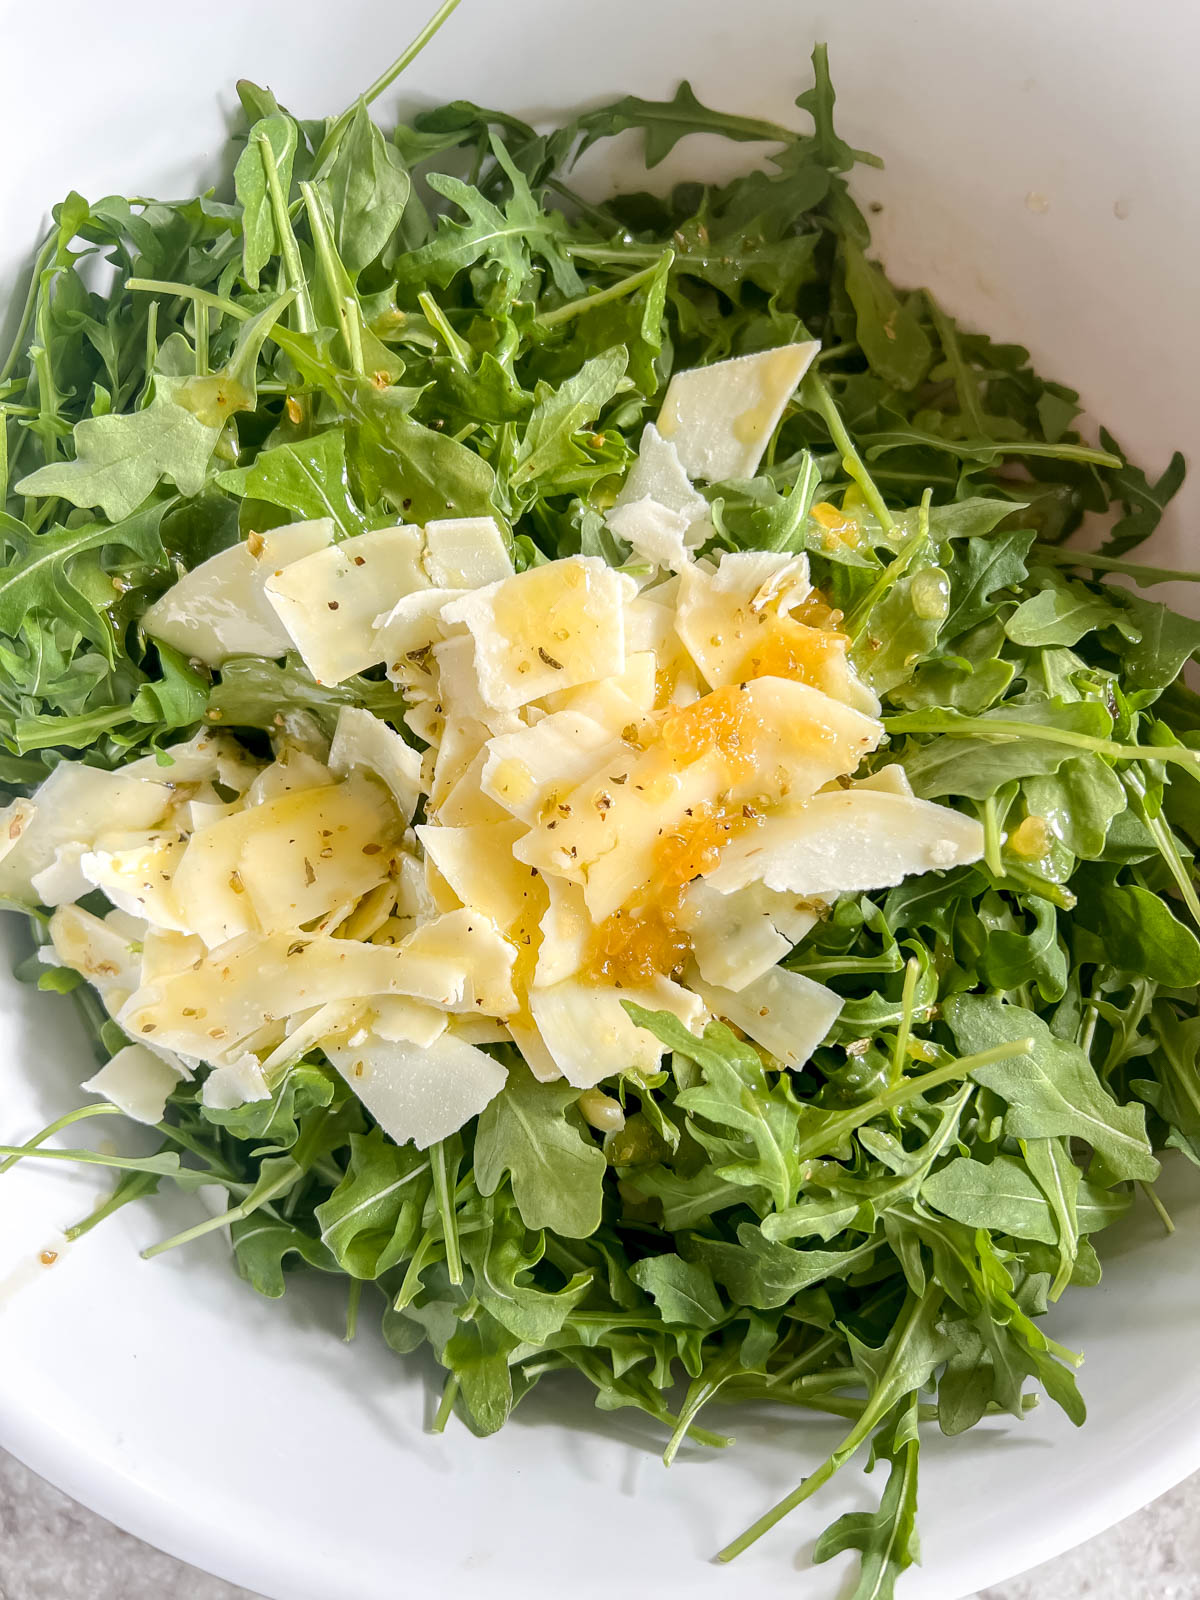 Dressing and parmesan on top of arugula.